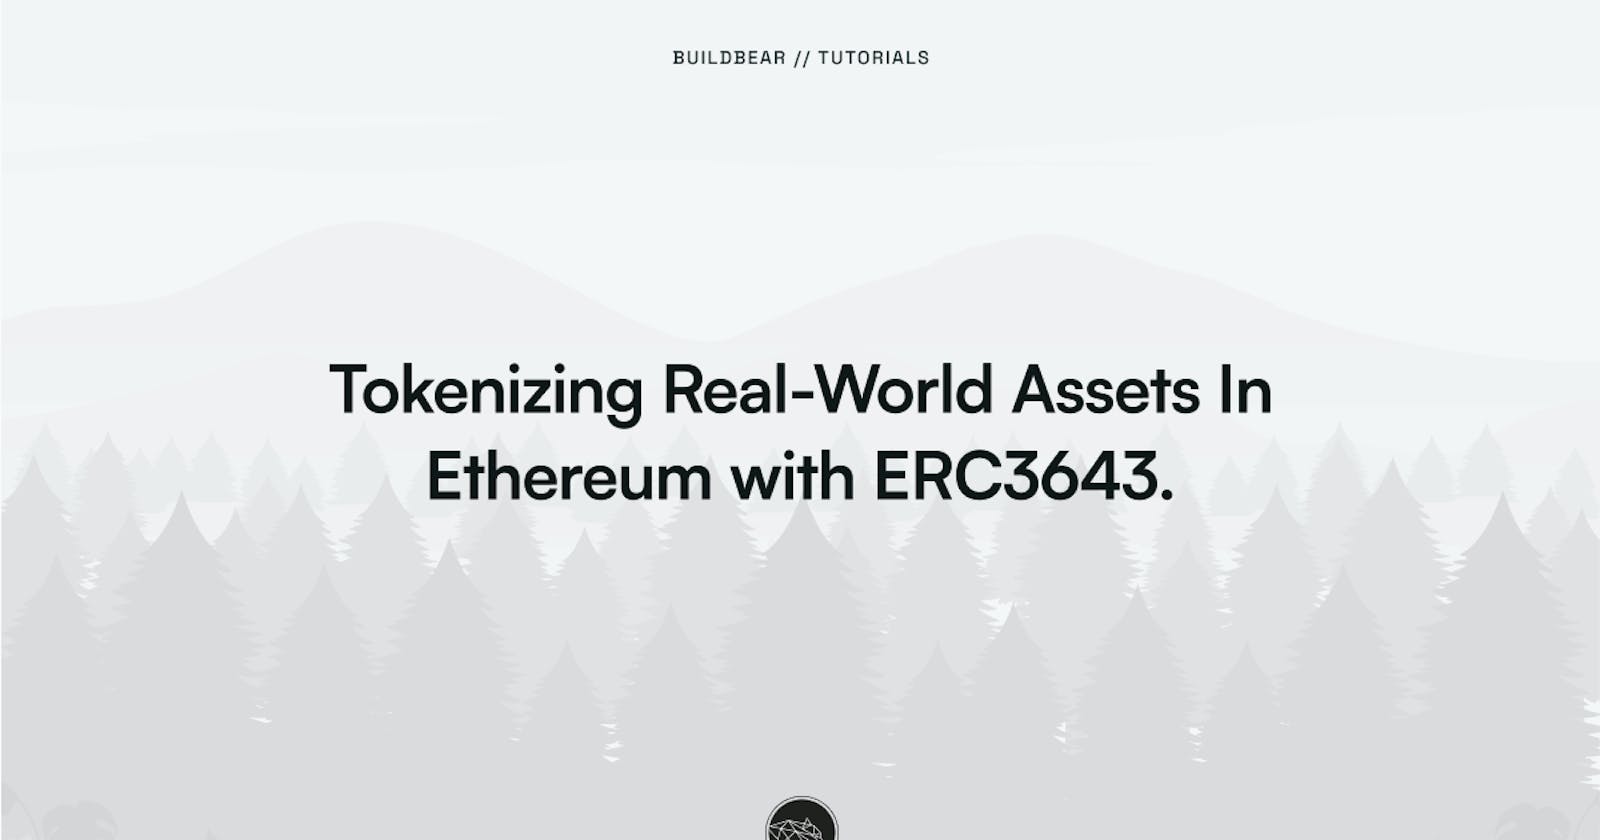 Tokenization of Real-World Assets In Ethereum with ERC3643.